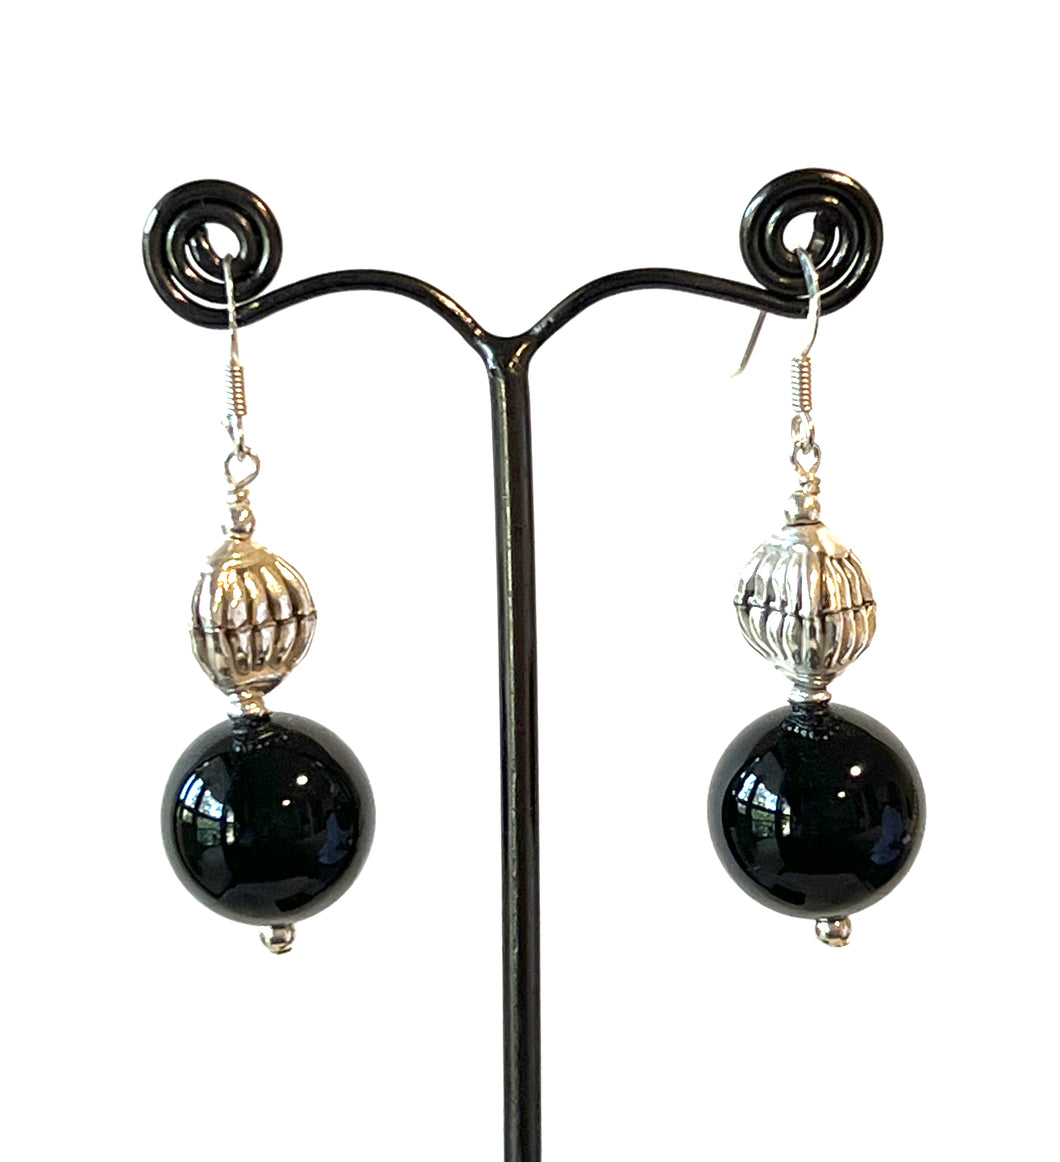 Black Earrings with Onyx and Sterling Silver Bead